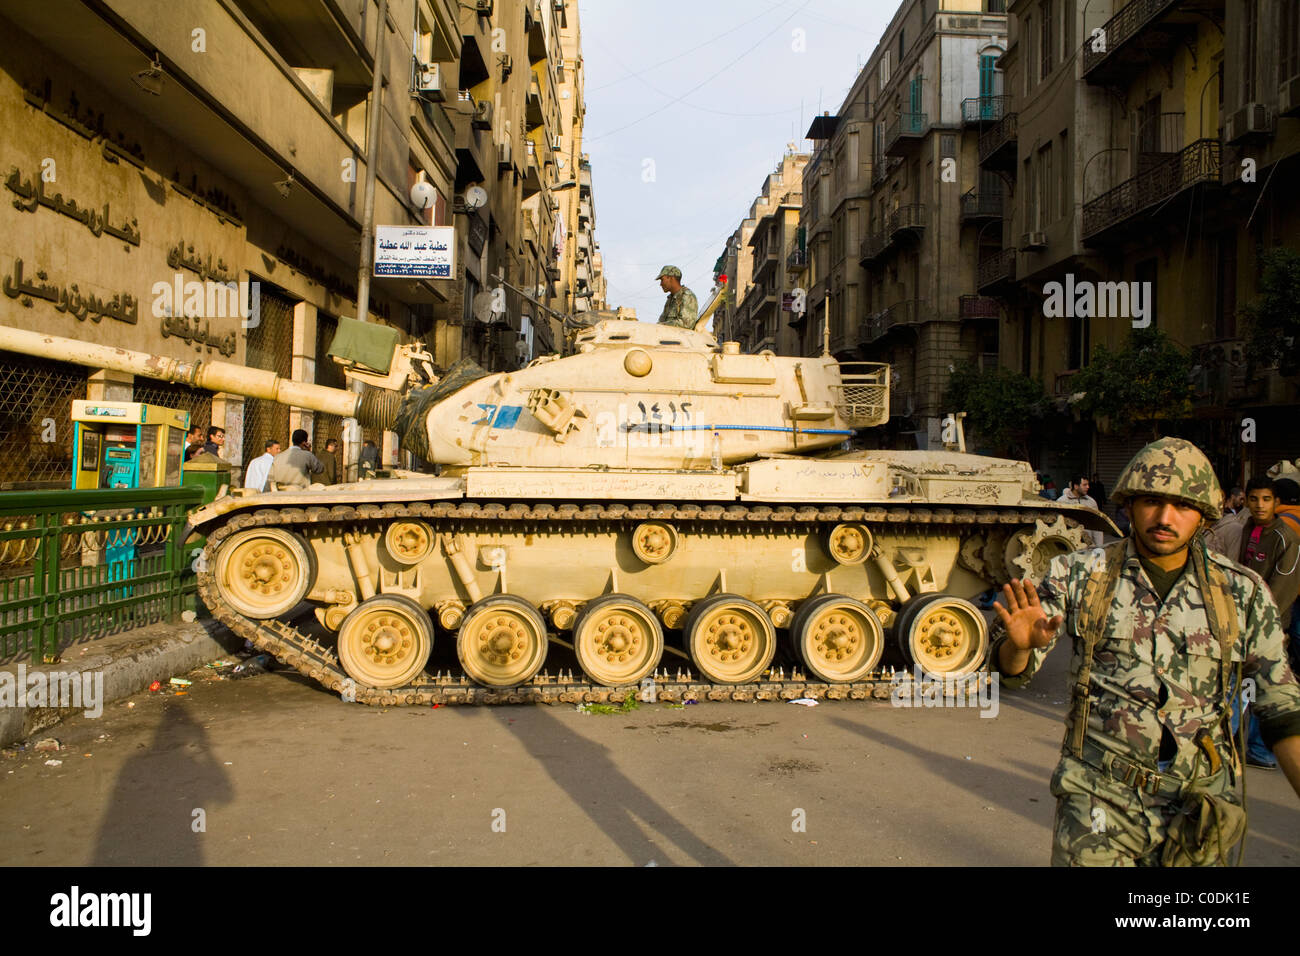 During the anti-government protests, an army tank blocks a street leading into Tahrir Square in downtown Cairo on Jan. 30, 2011 Stock Photo